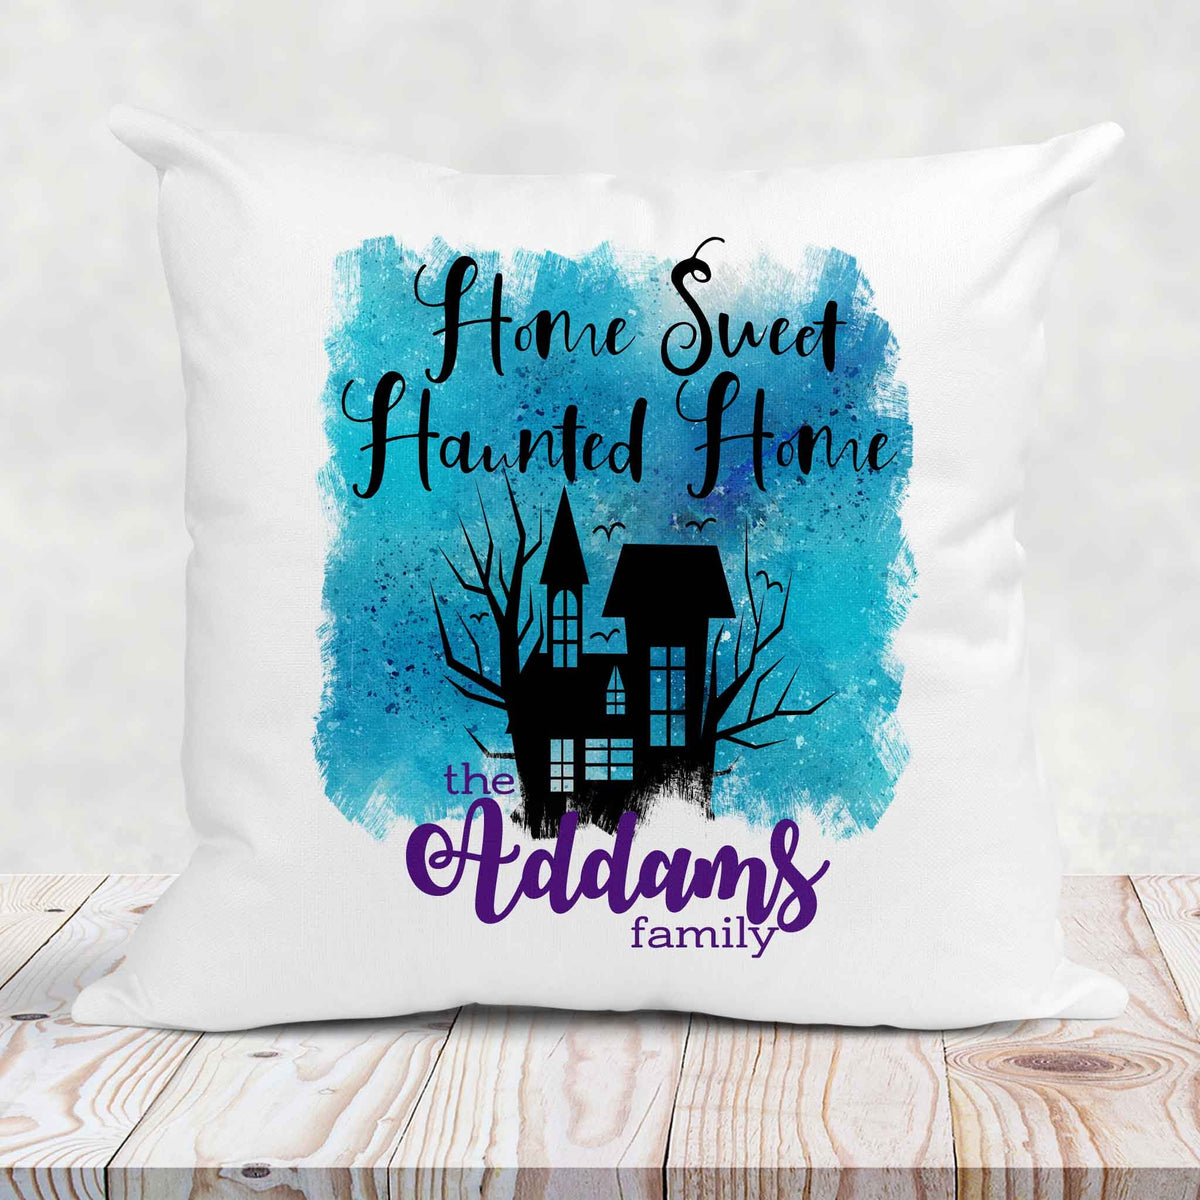 Personalized Throw Pillow | Custom Decorative Pillow | Home Sweet Haunted Home